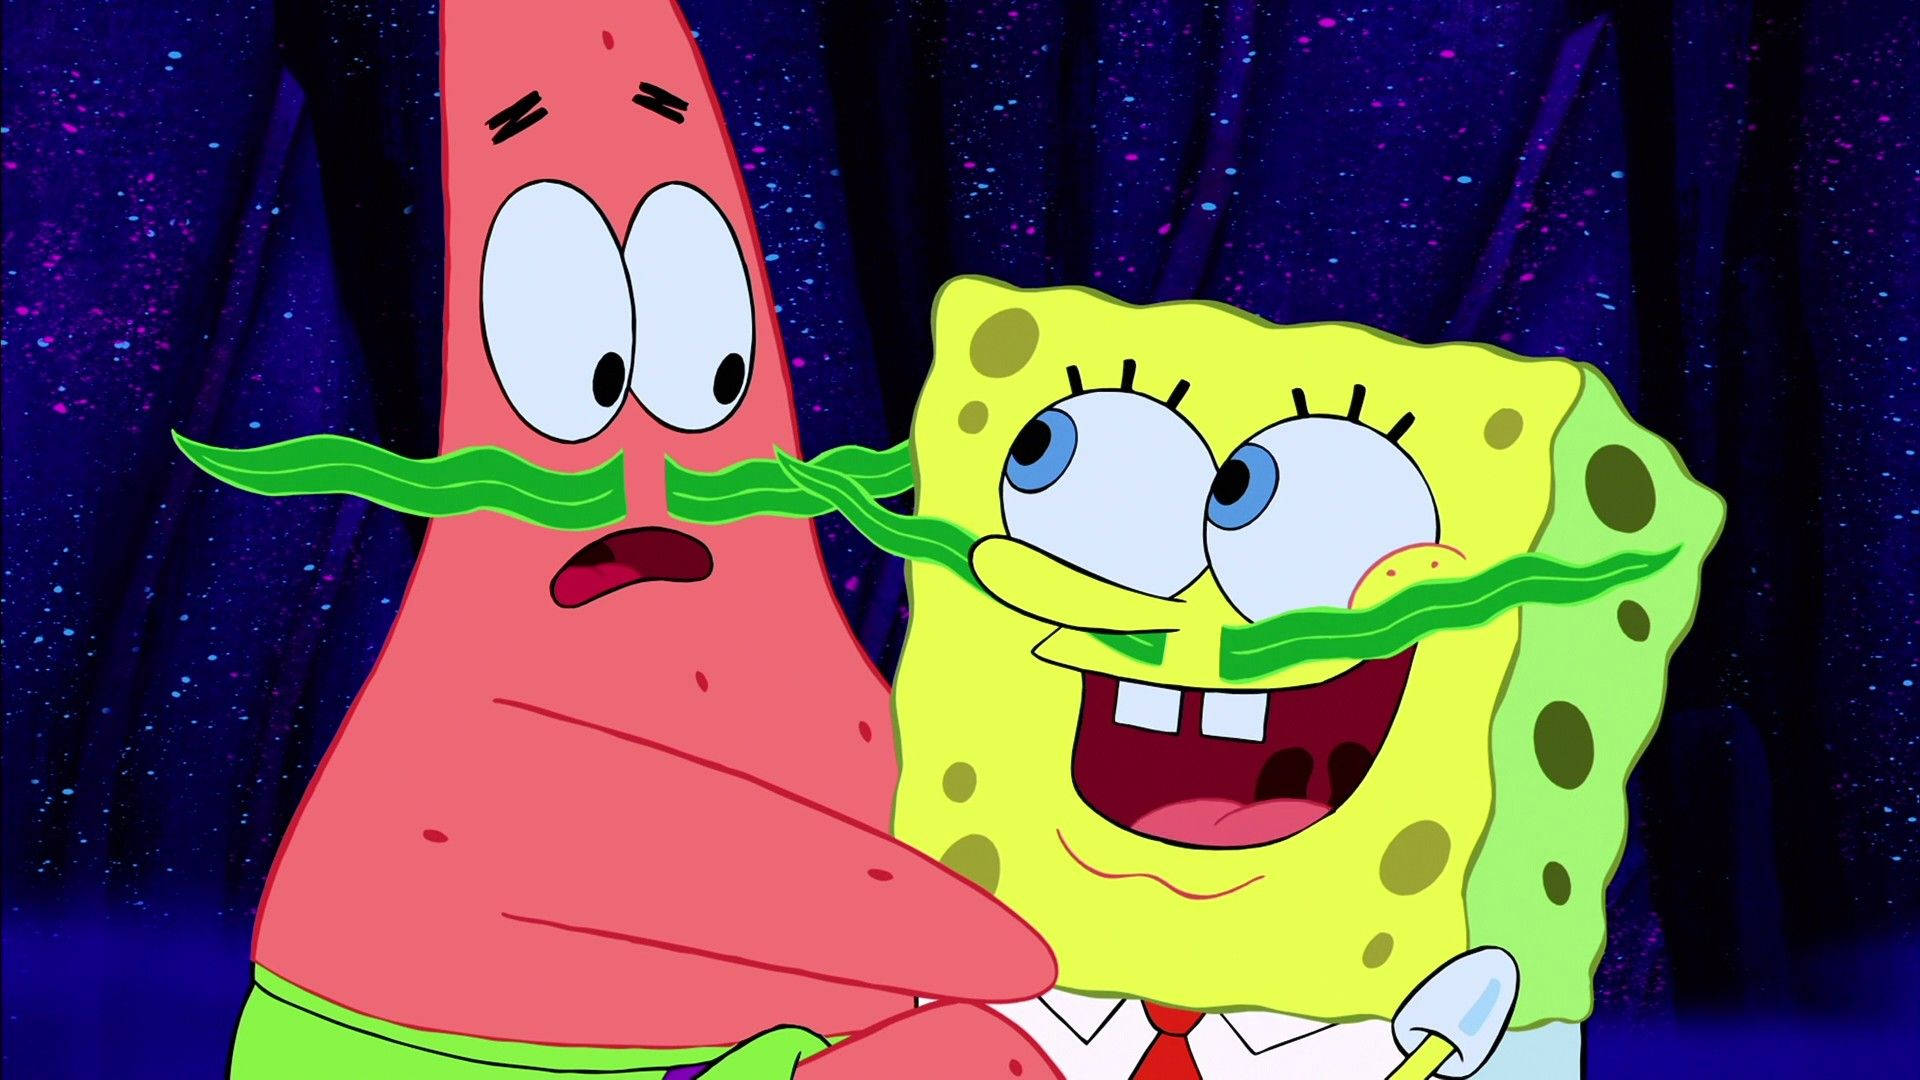 Spongebob And Patrick With Seaweed Mustaches